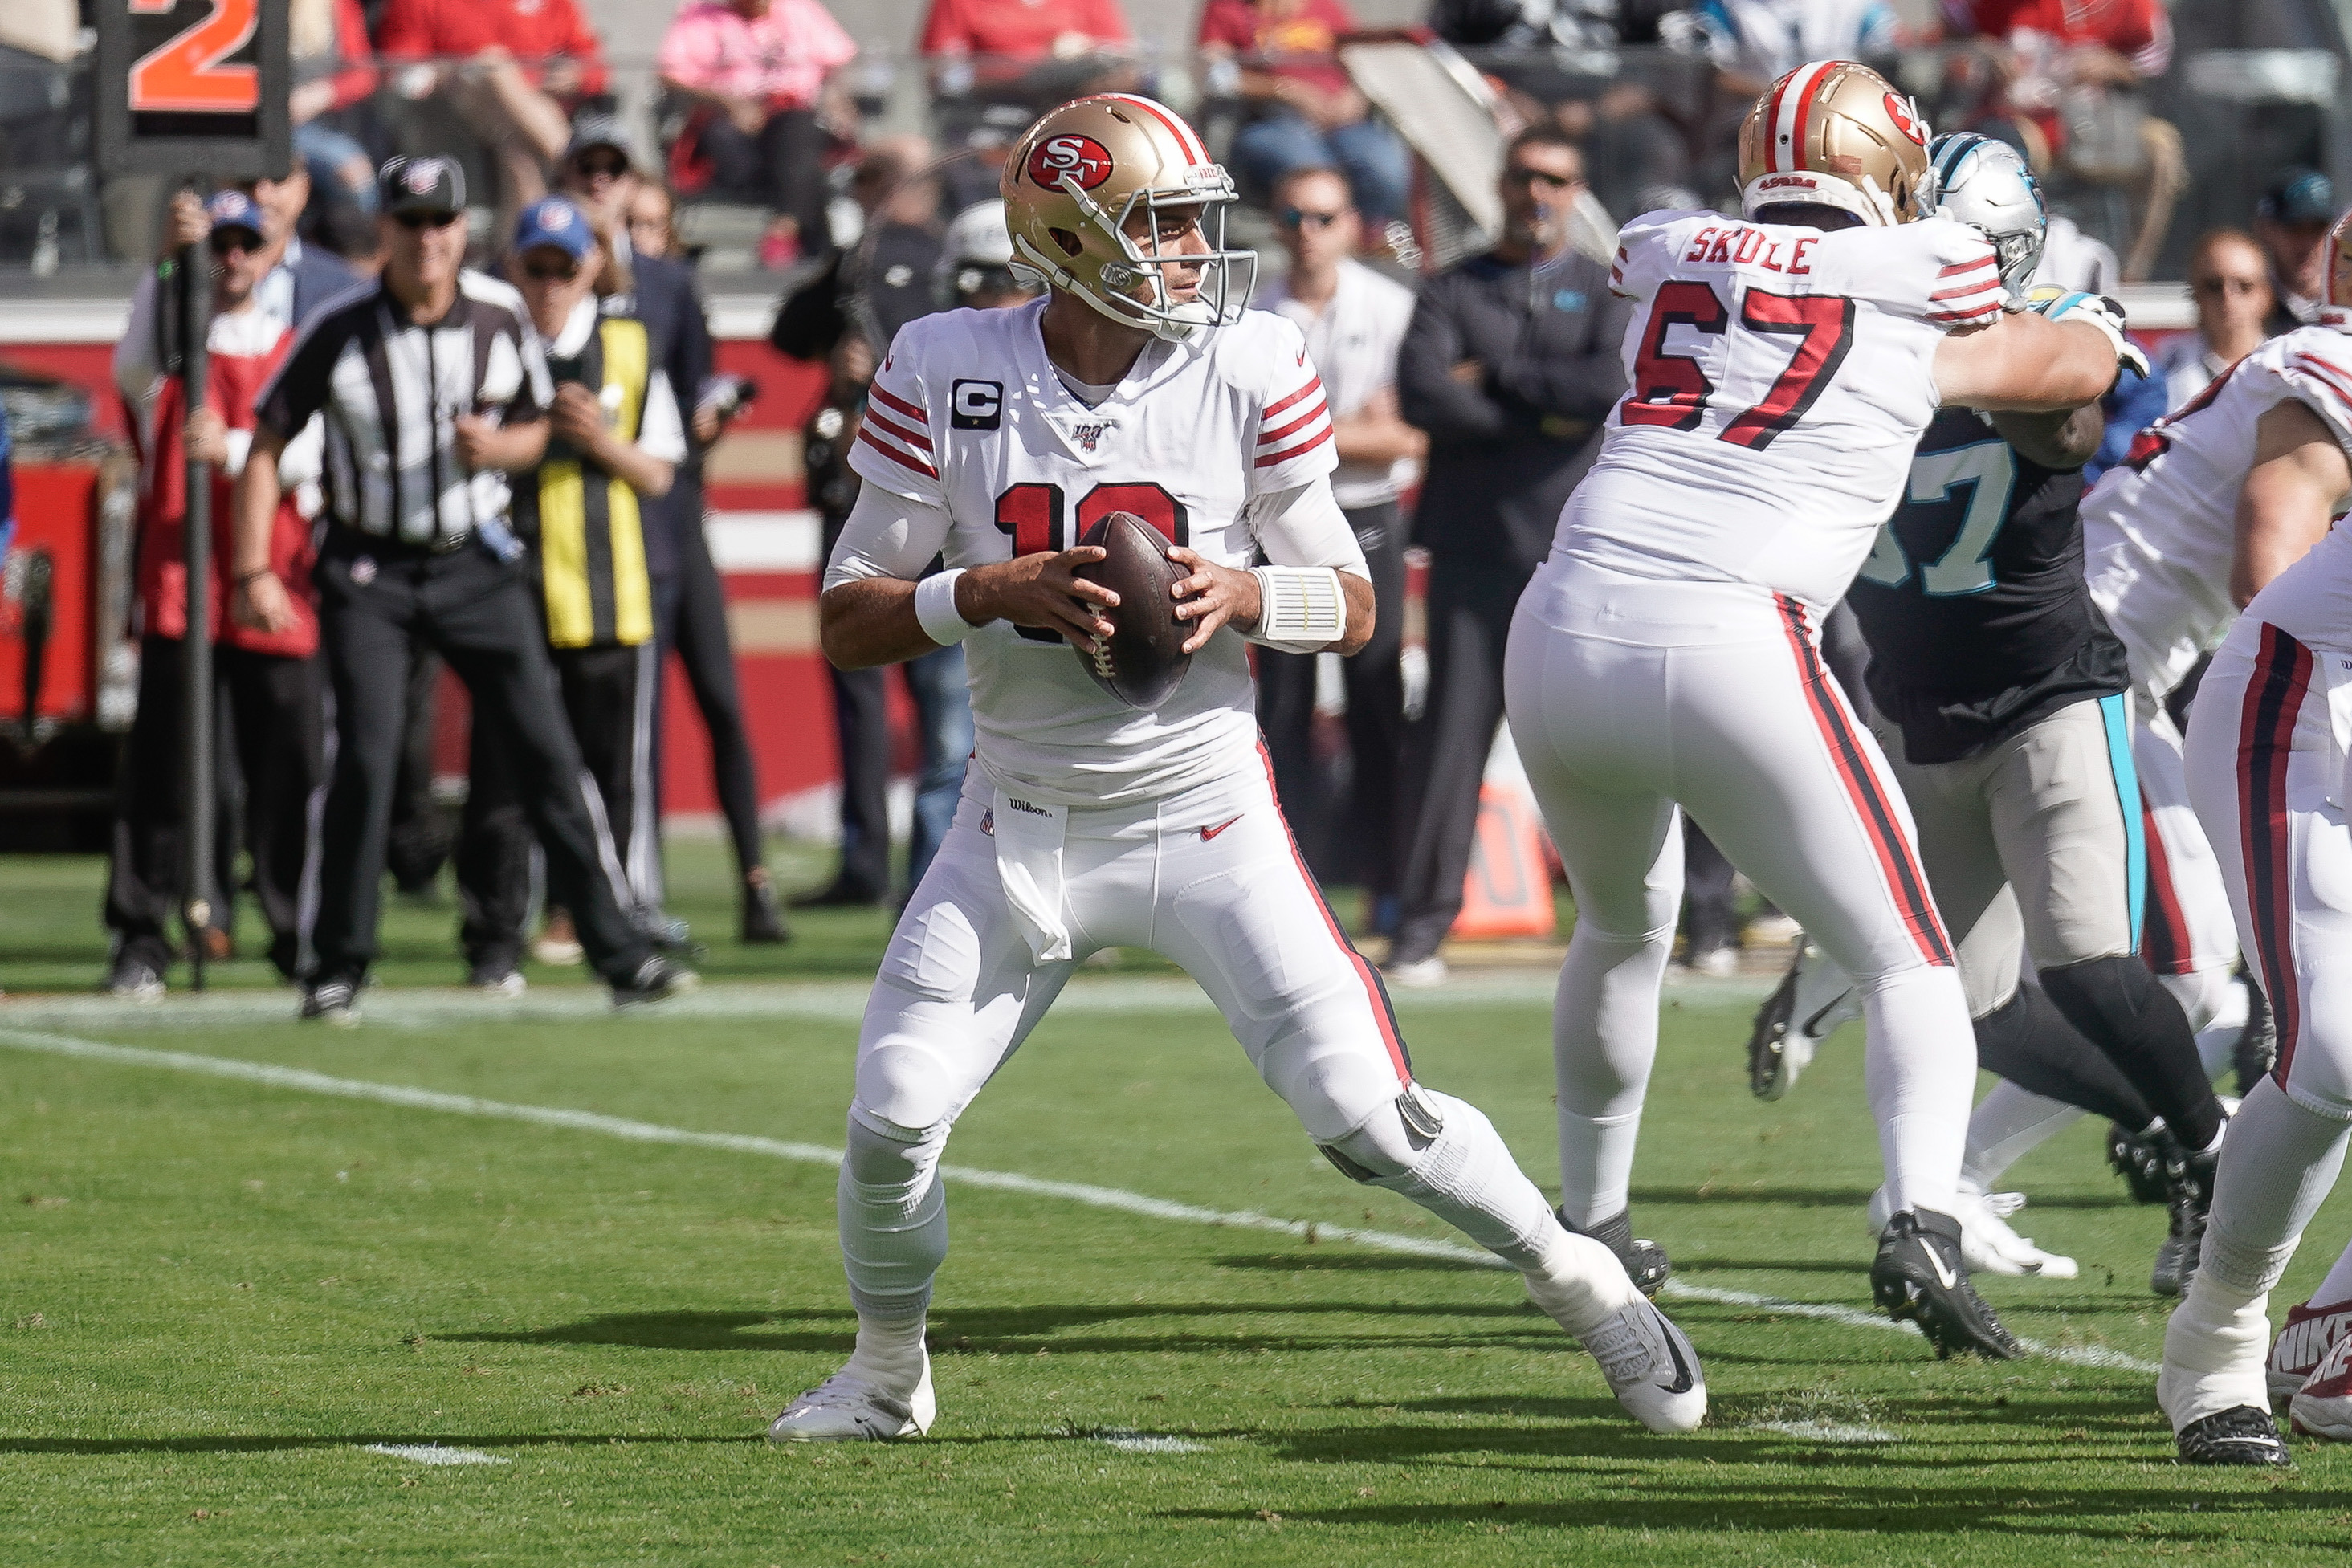 San Francisco 49ers quarterback Jimmy Garoppolo looks to pass the ball against the Carolina Panthers during the first quarter at Levi’s Stadium.